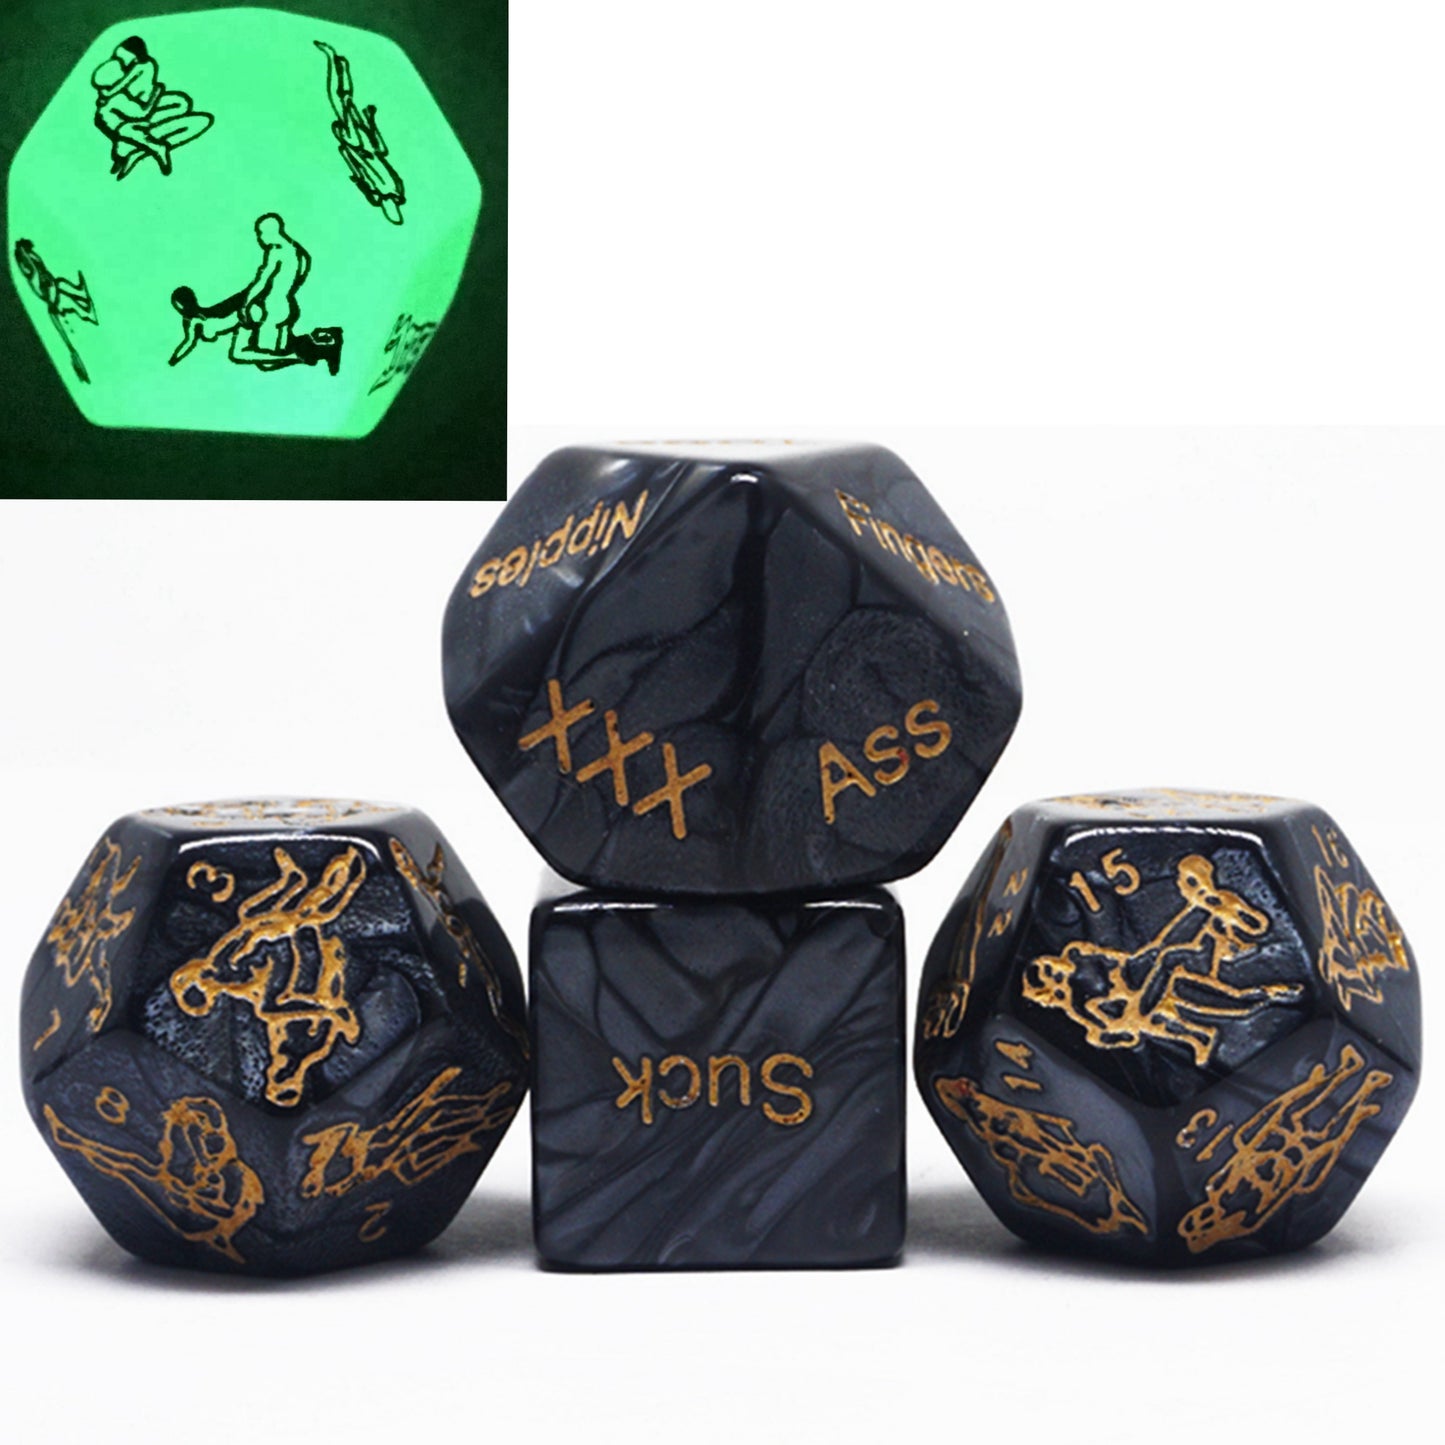 Glow in the Dark Sex Dice Sex Game for Adult Couples Prime with 36-Sex-Position and 60 EROTIC FOREPLAY OPTIONS Sex Toys & Games Glow Funny Luminous Sex Dice for  Bachelor Party or Couples Novelty Gift